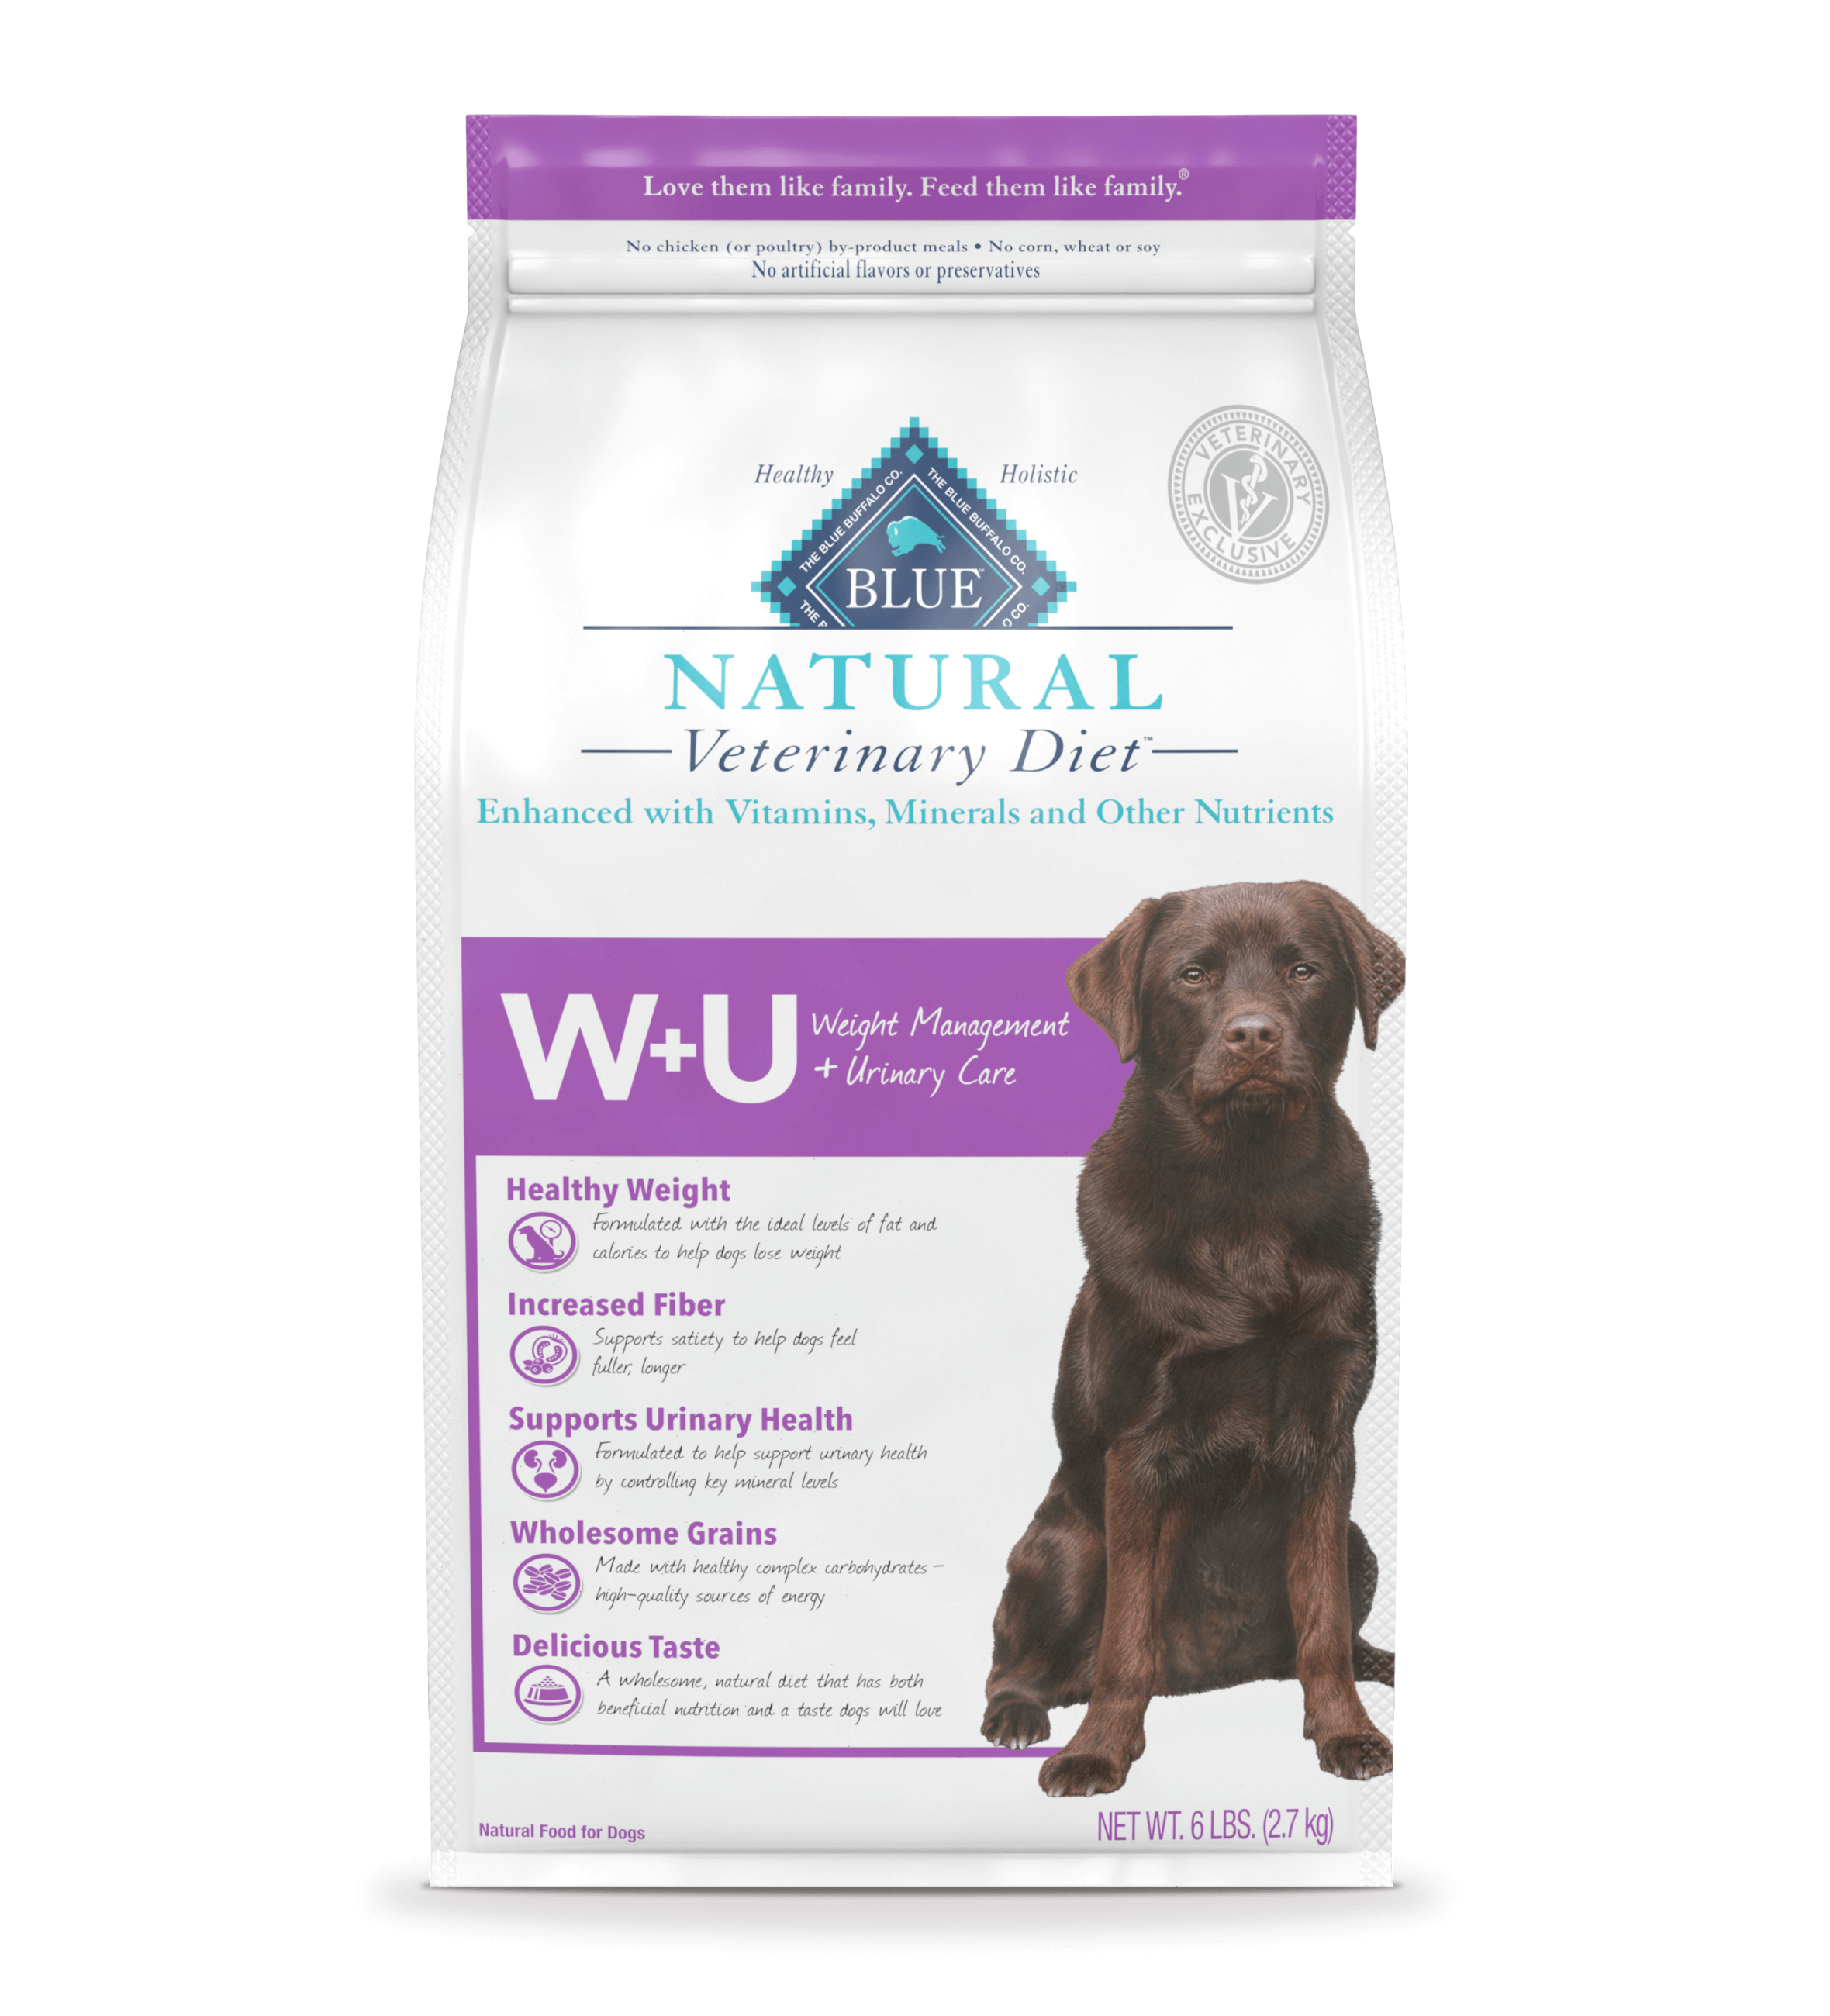 blue natural veterinary diet w+u weight management & urinary care dog dry food